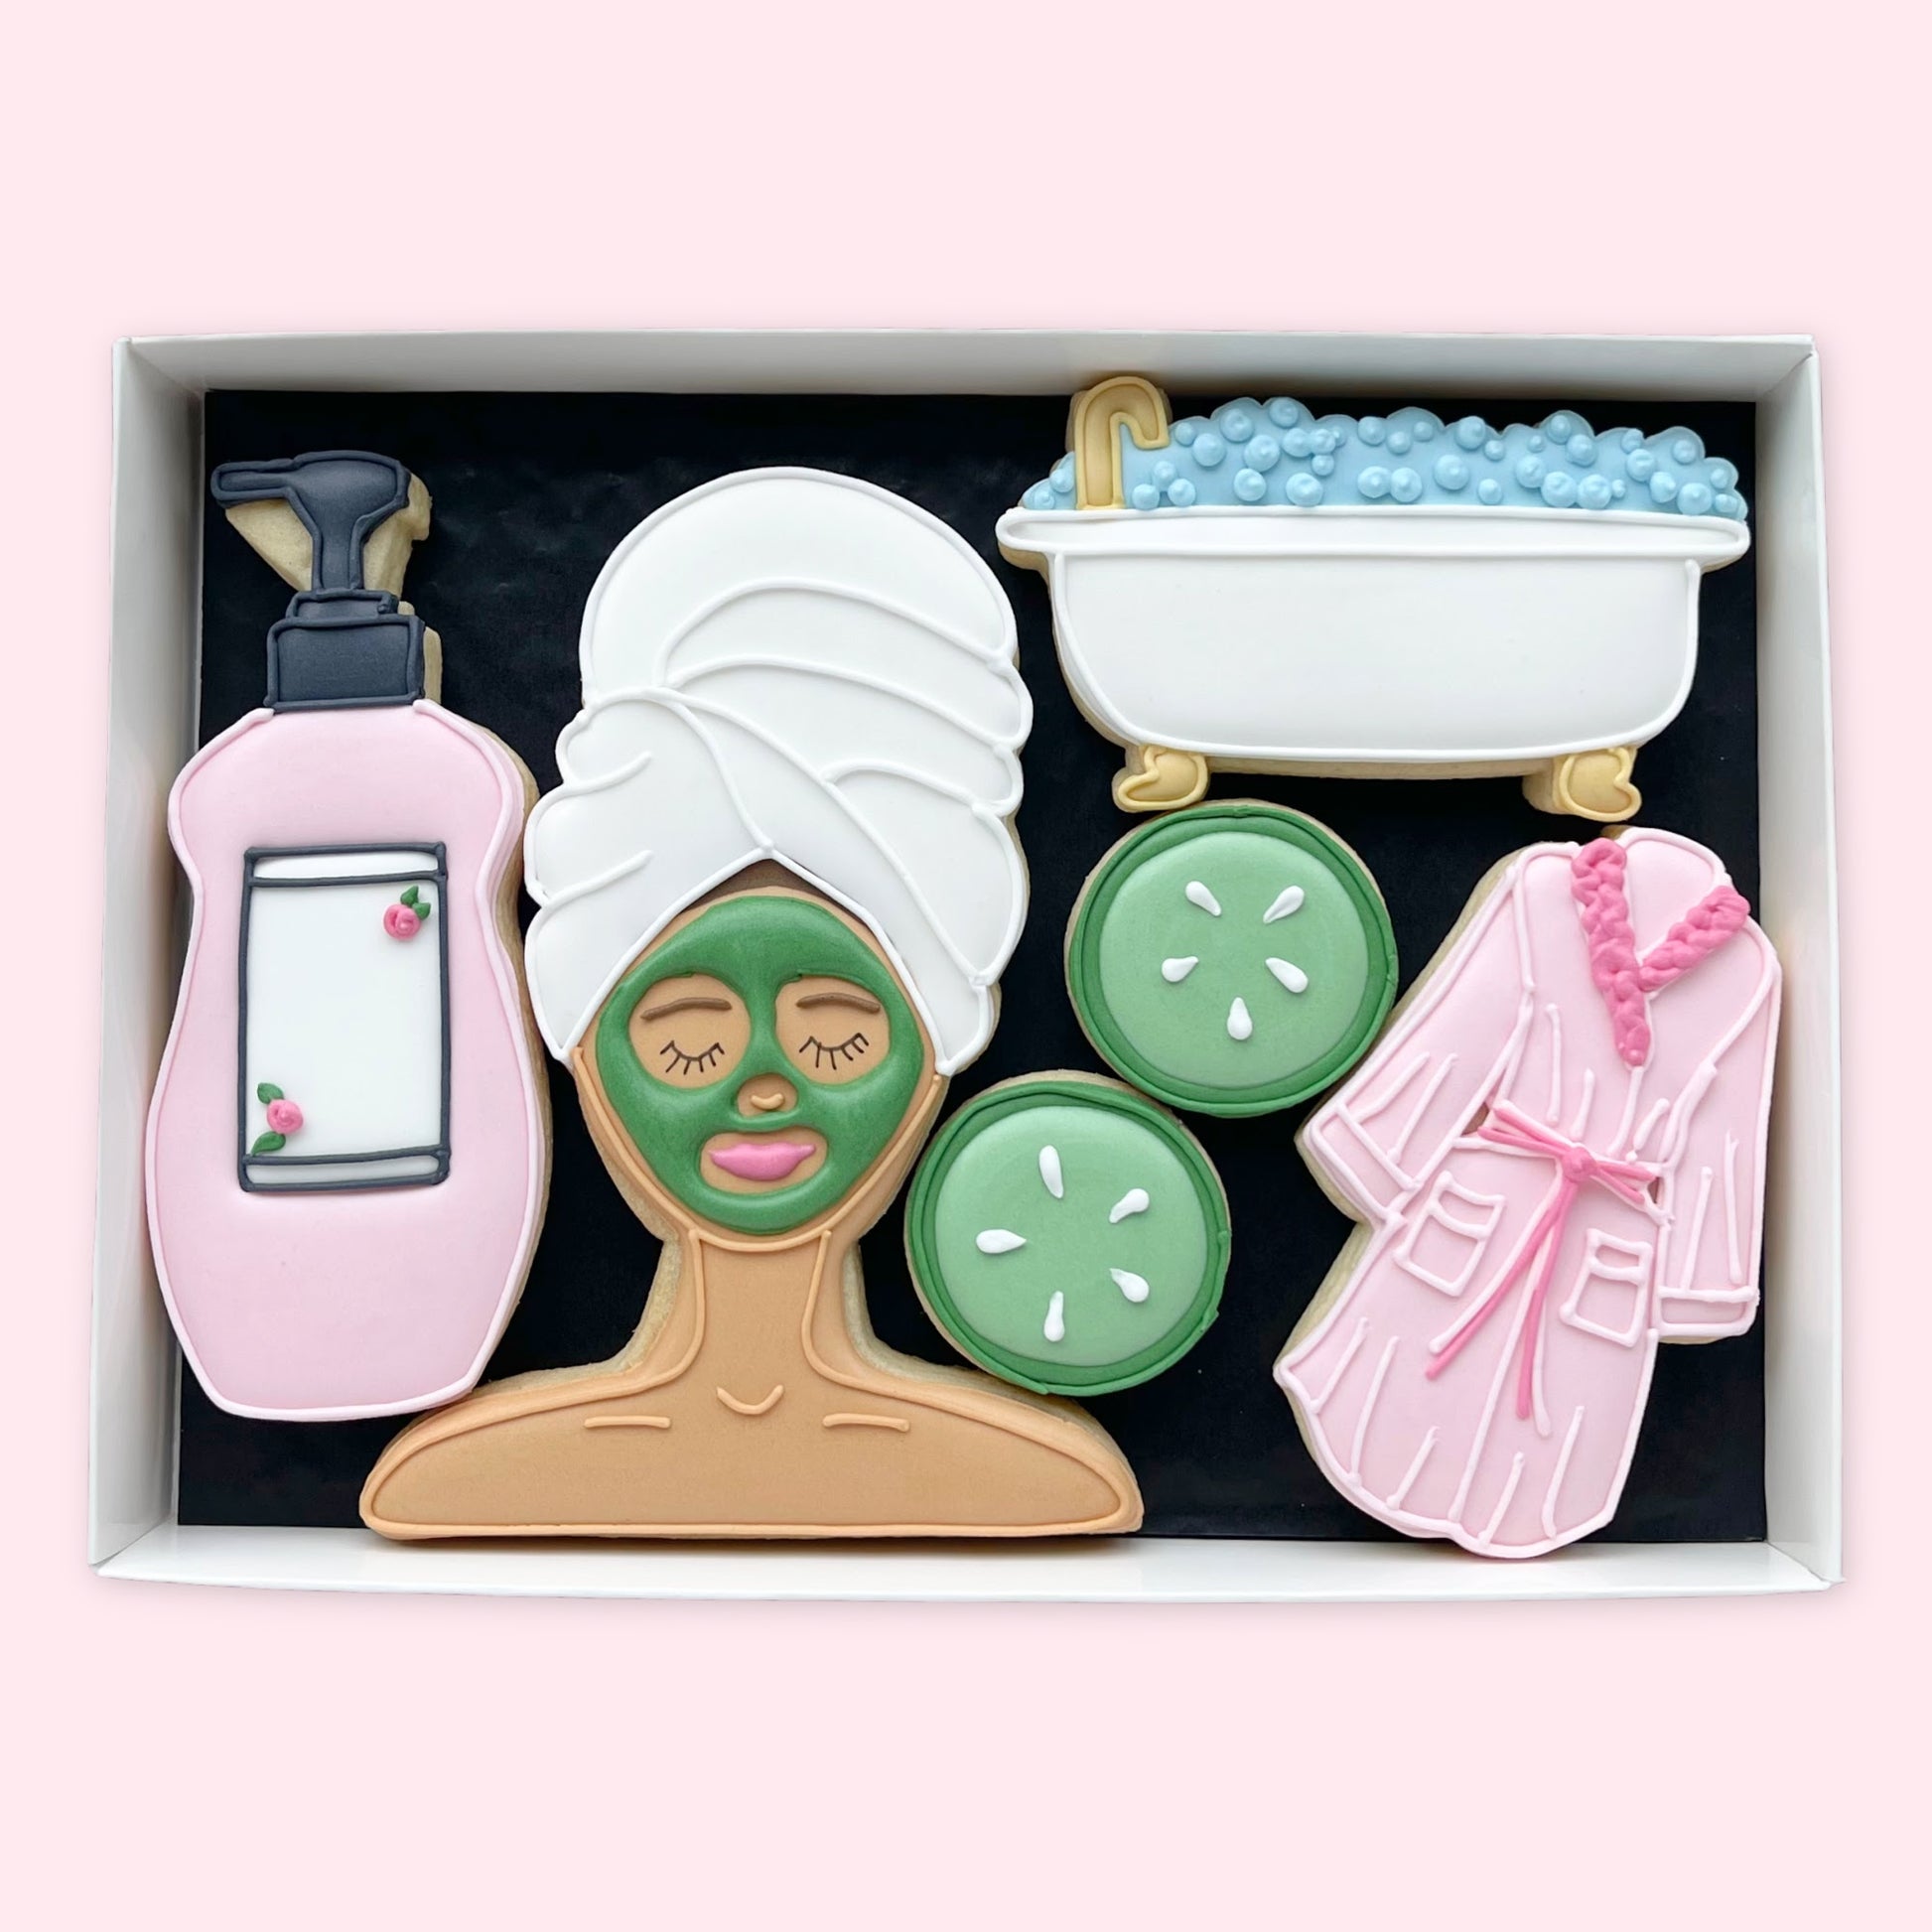 Spa day themed hand iced biscuits in pinks in an open white gift box by Katie's biscuit shop